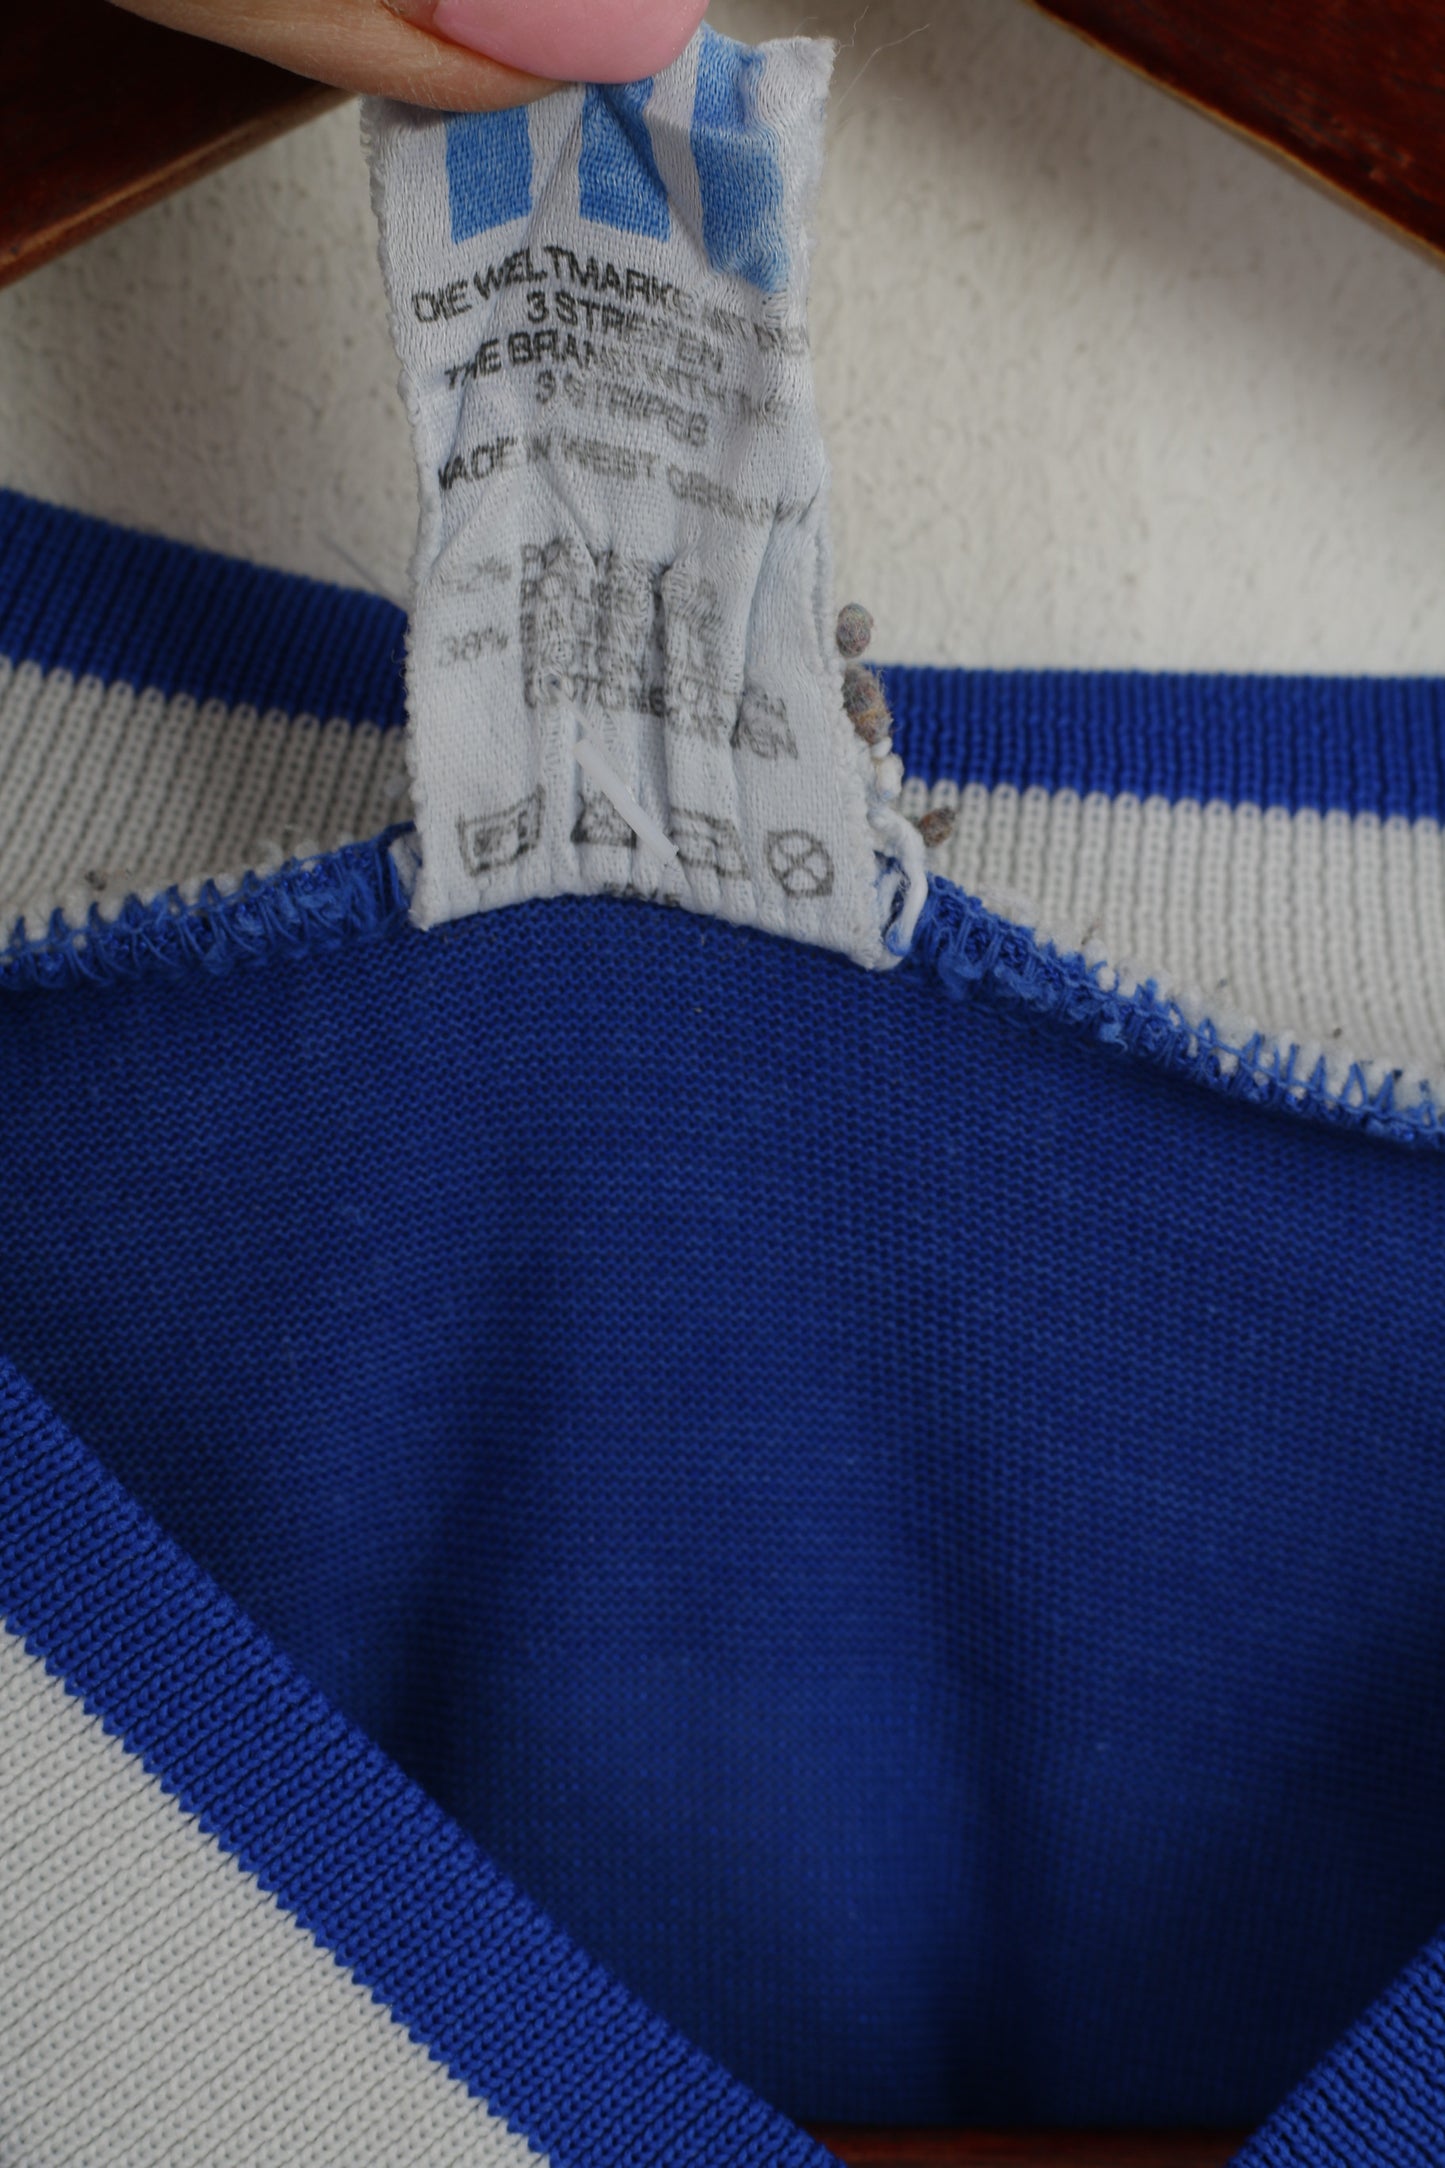 Adidas Men L (M) Shirt Blue Ergee #15 Vintage Made in West Germany Jersey Top